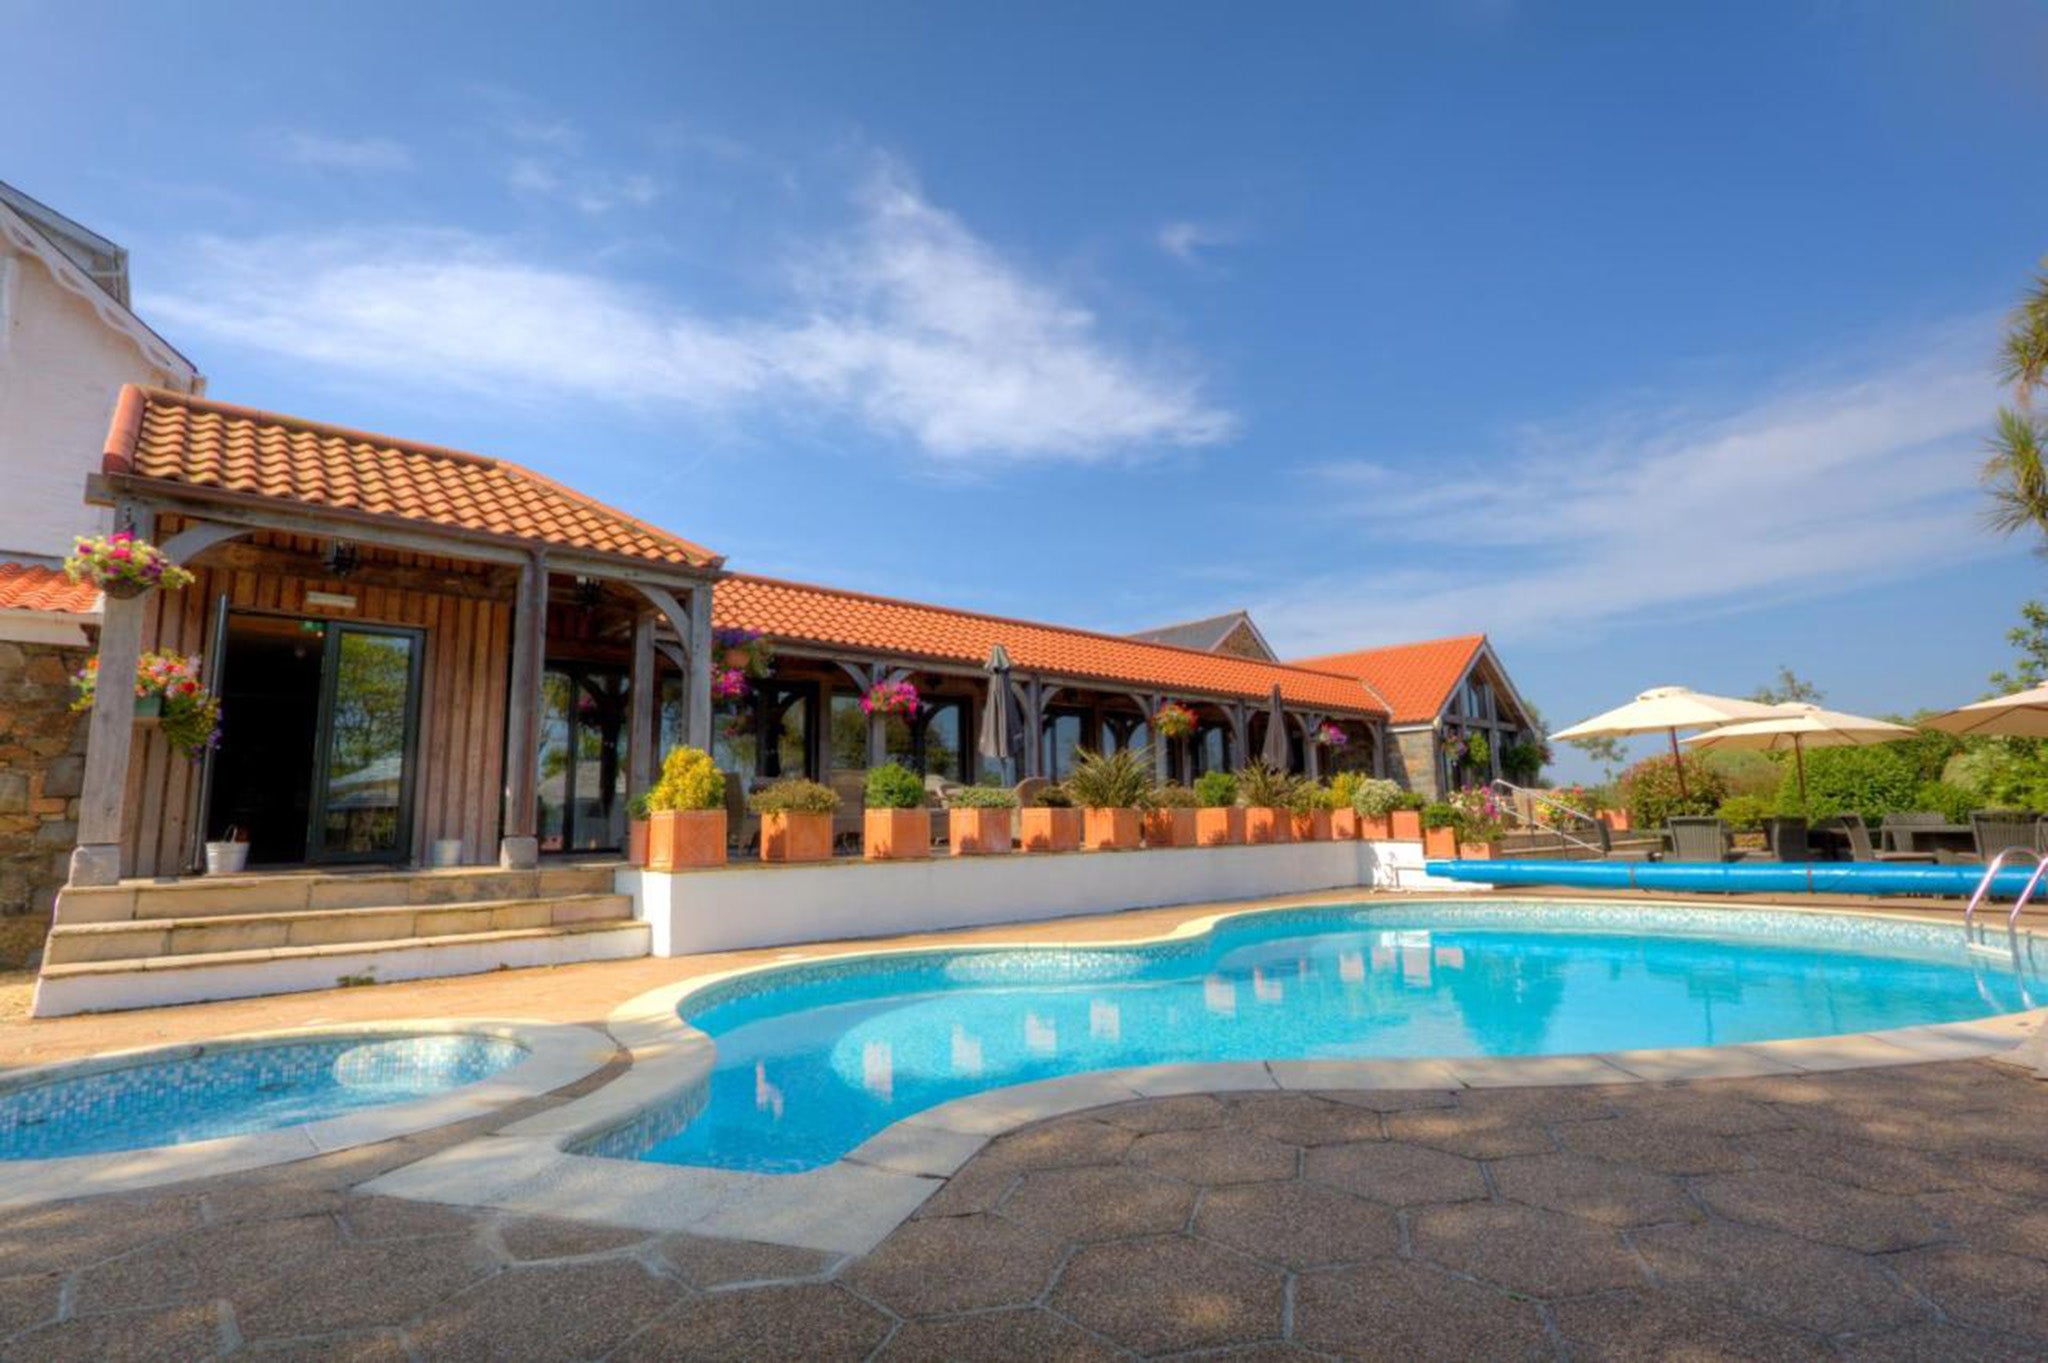 Unwind with a dip in the heated pool